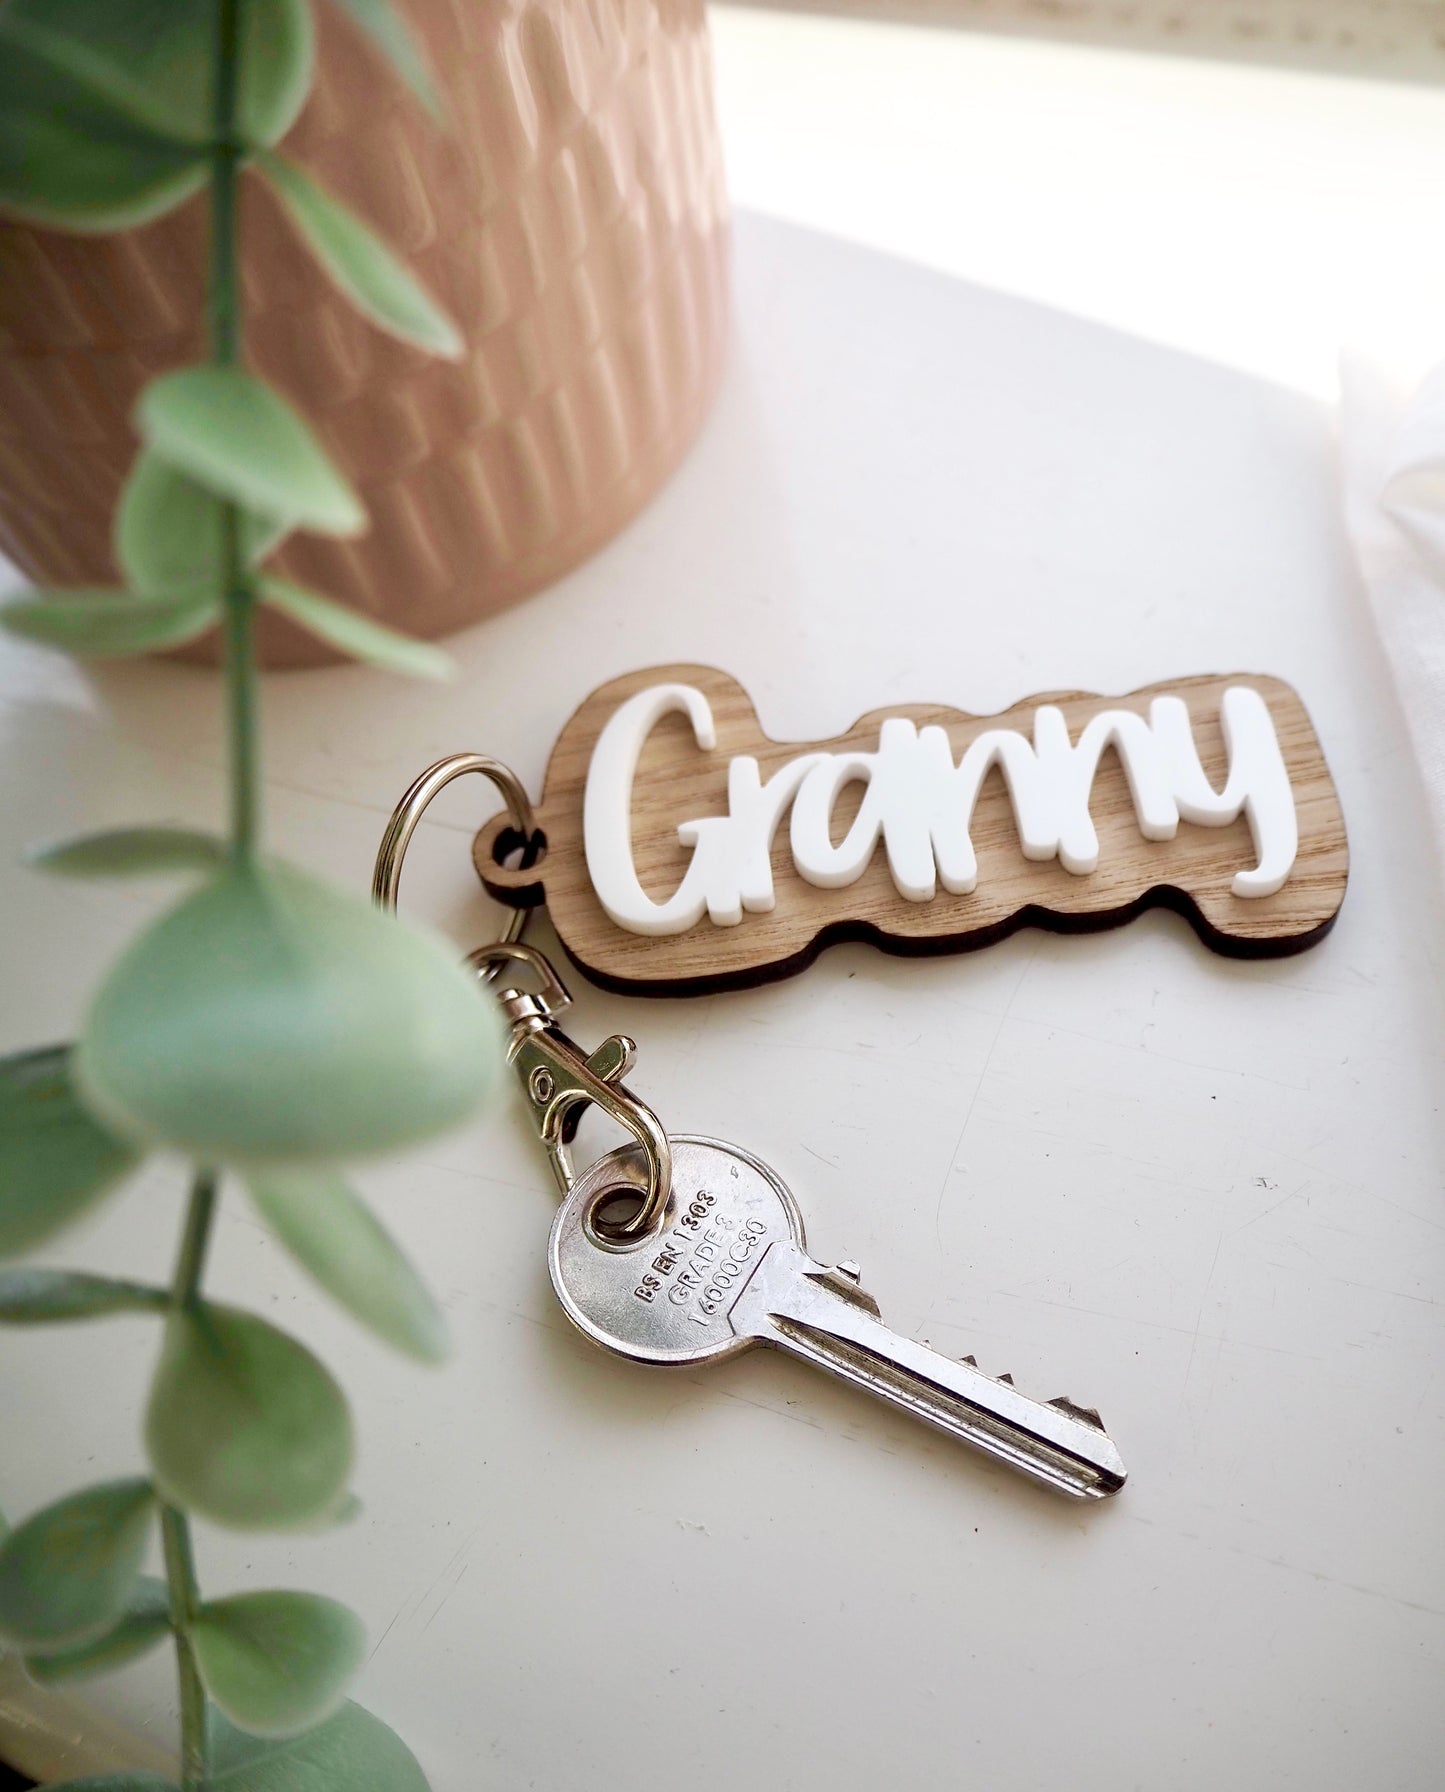 Wooden key ring with the word Granny in white acrylic